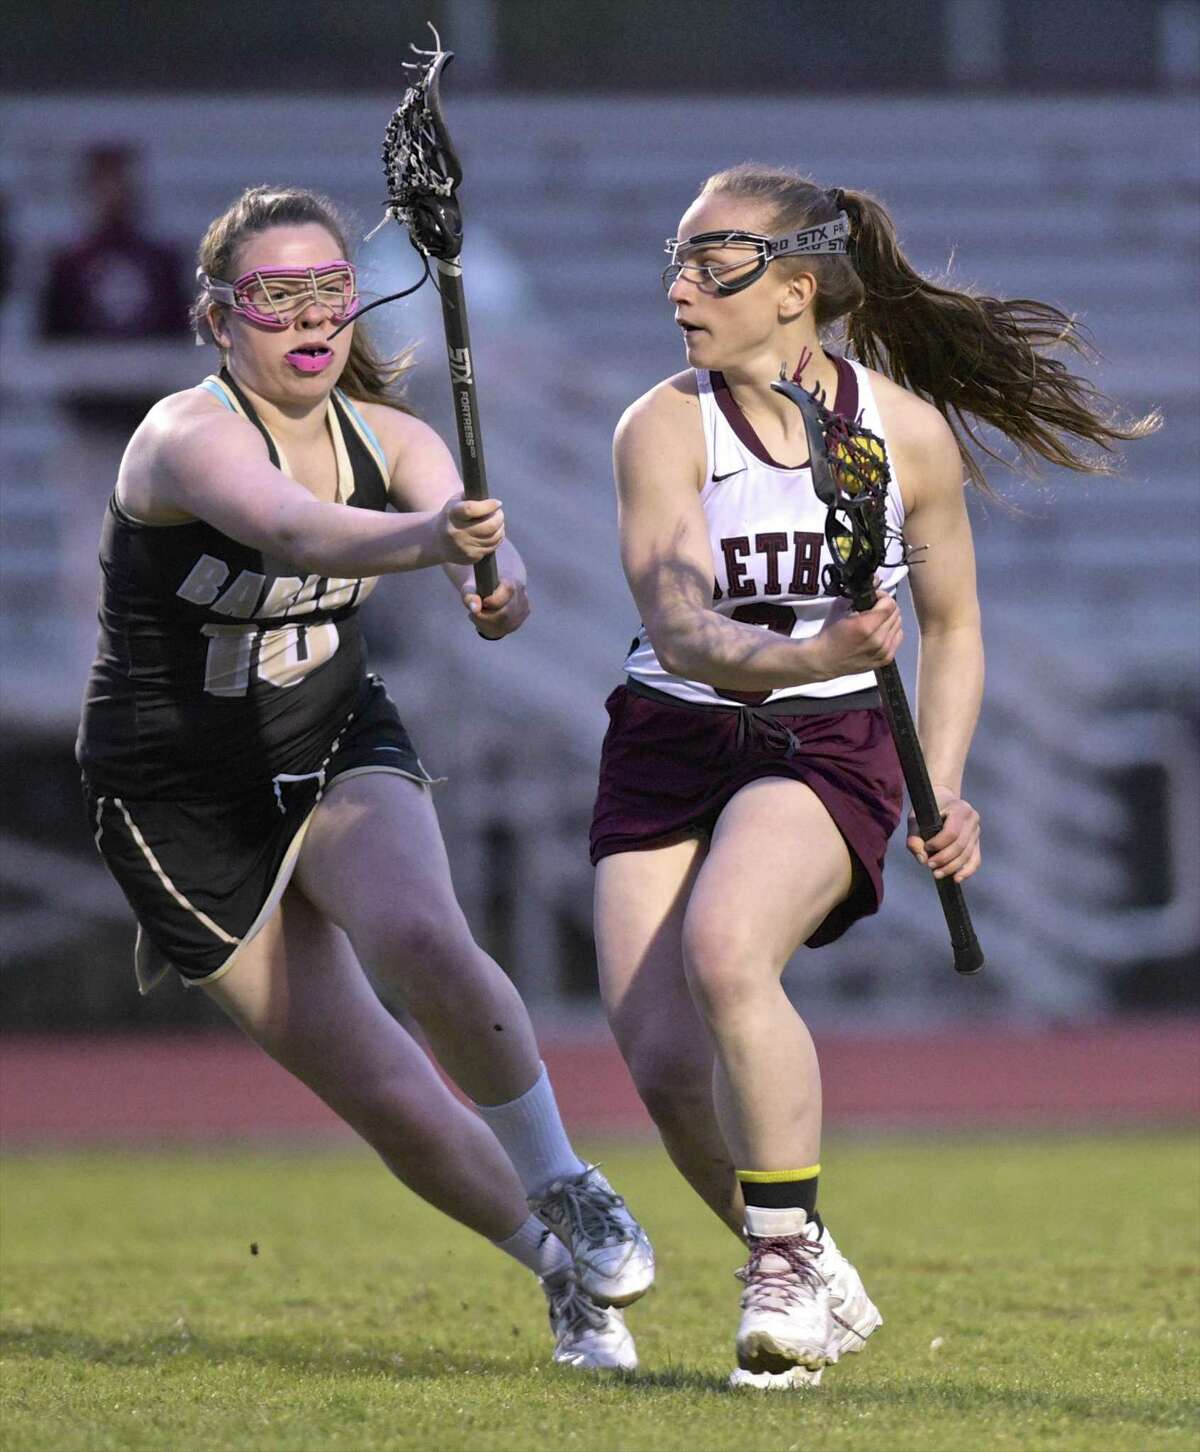 Joel Barlow's Molly Carroll (10) reaches out to block bethel's Christiana Ruiz (8) in the girls lacrosse game between Joel Barlow and Bethel high schools, Tuesday afternoon, April 24, 2018, at Bethel High School, Bethel, Conn.